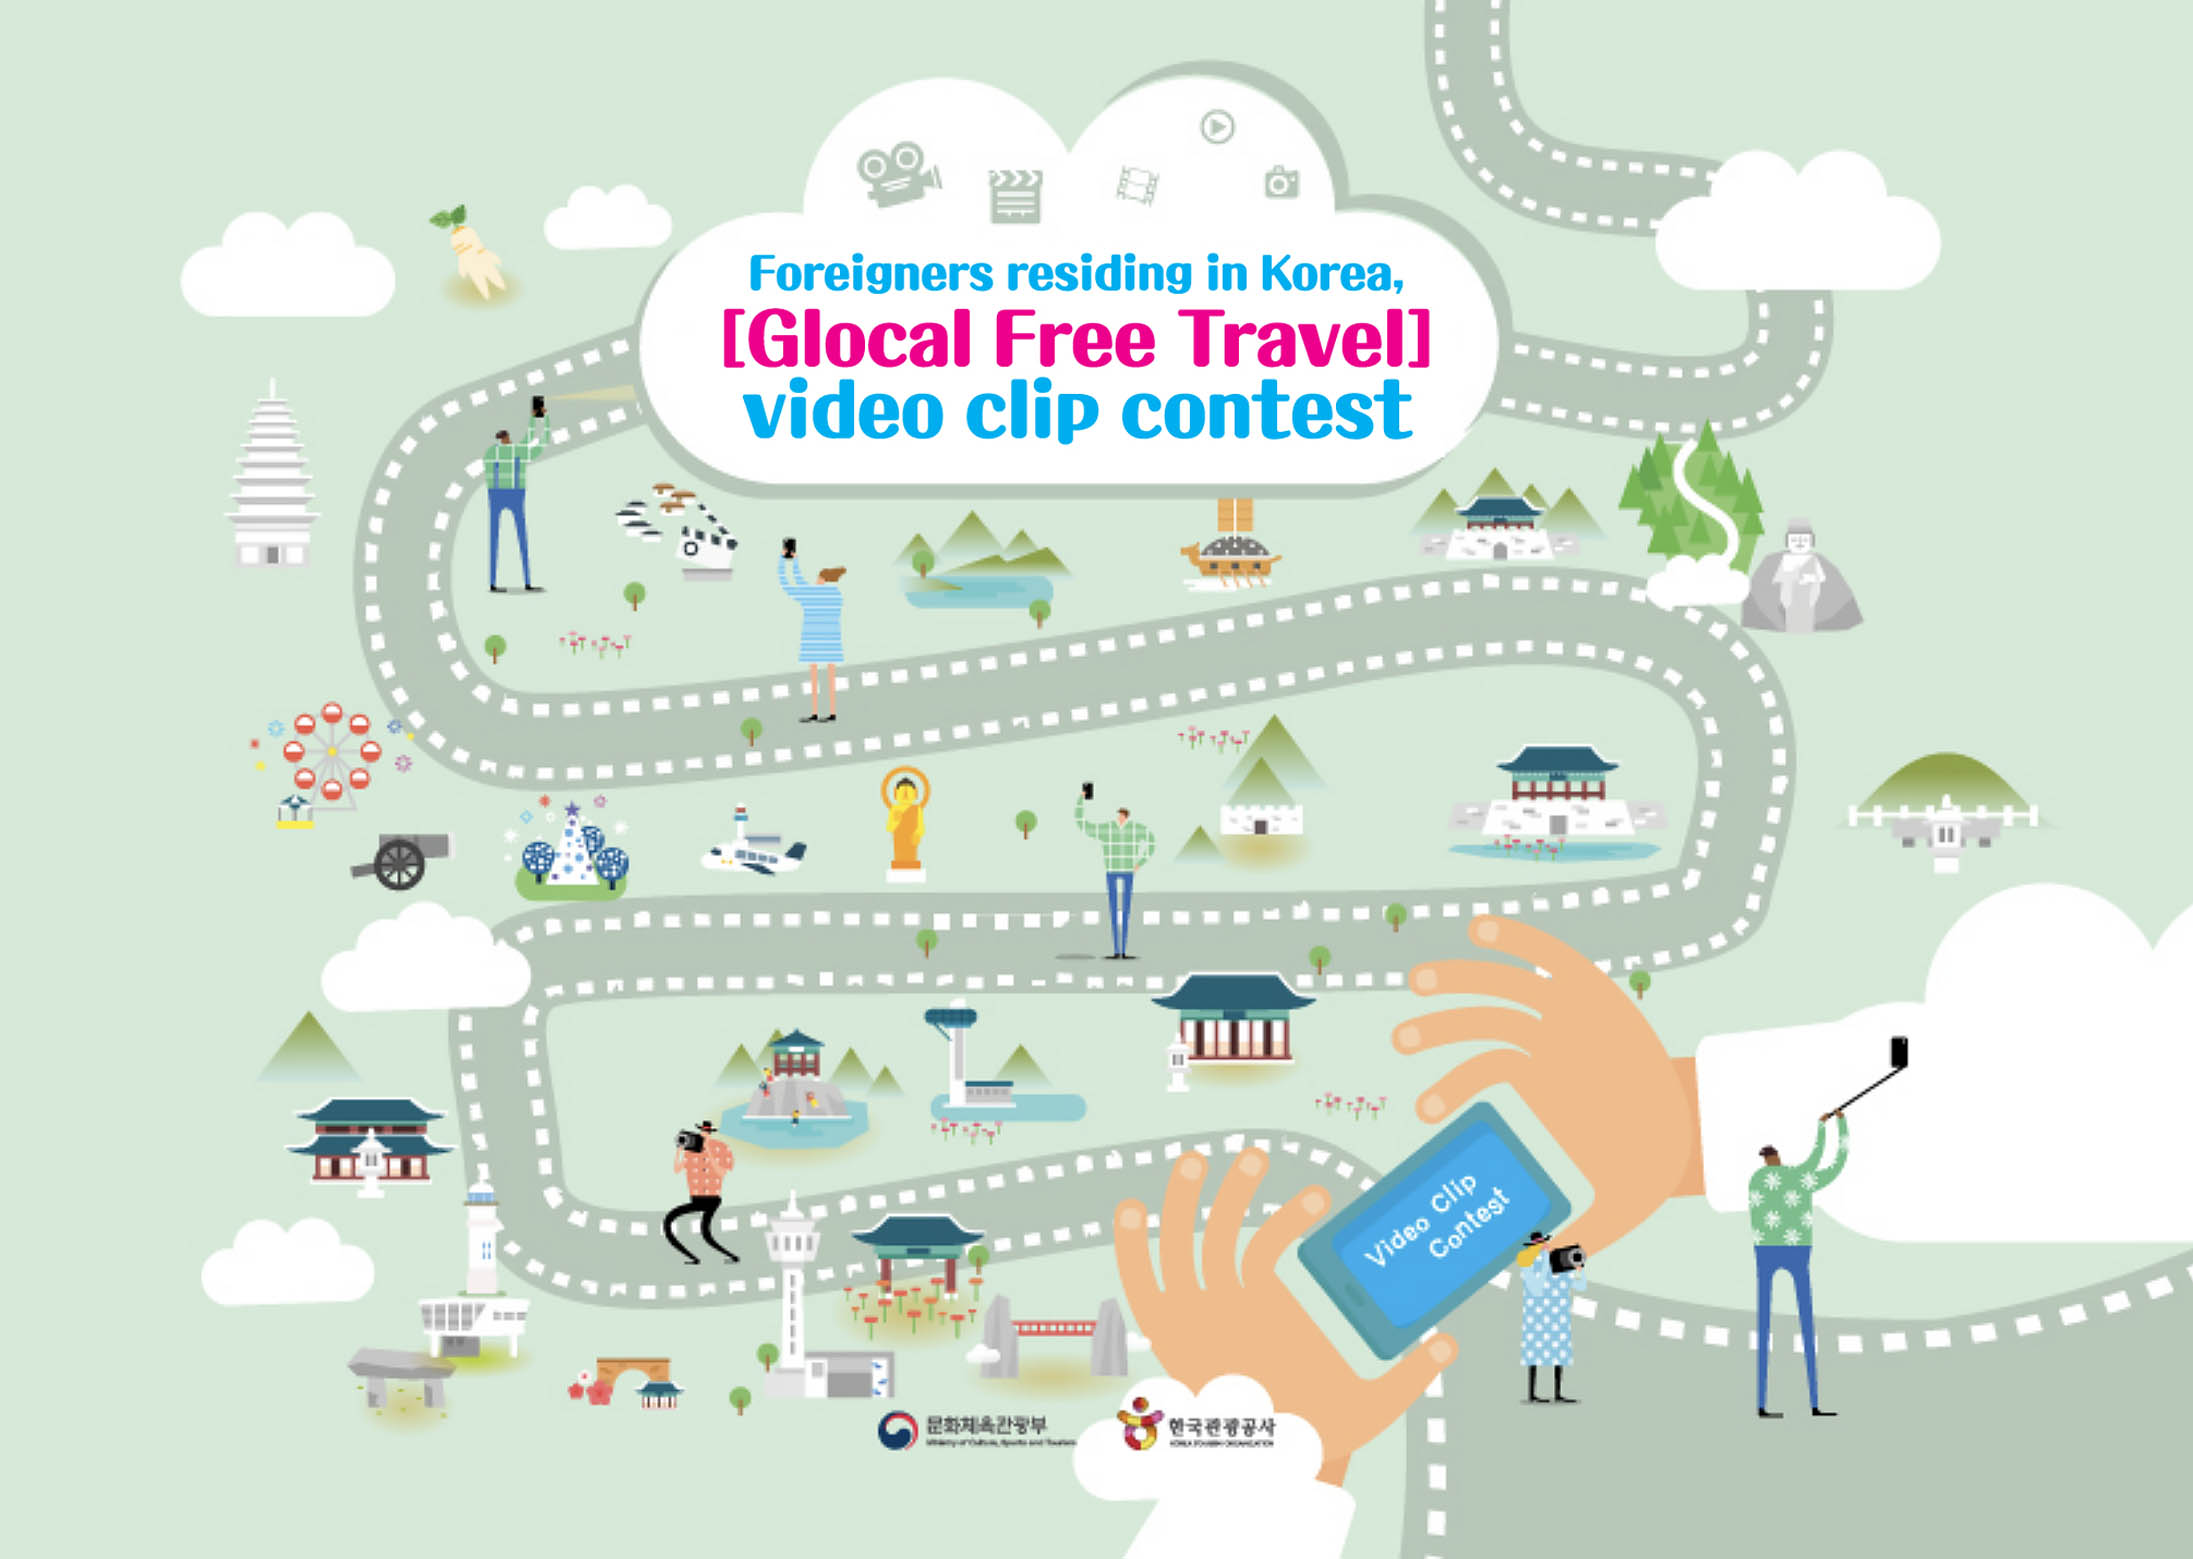 Foreigners residing in Korea, [Glocal Free Travel] video clip contest - Win the 18 million won (KRW) in total prize money!